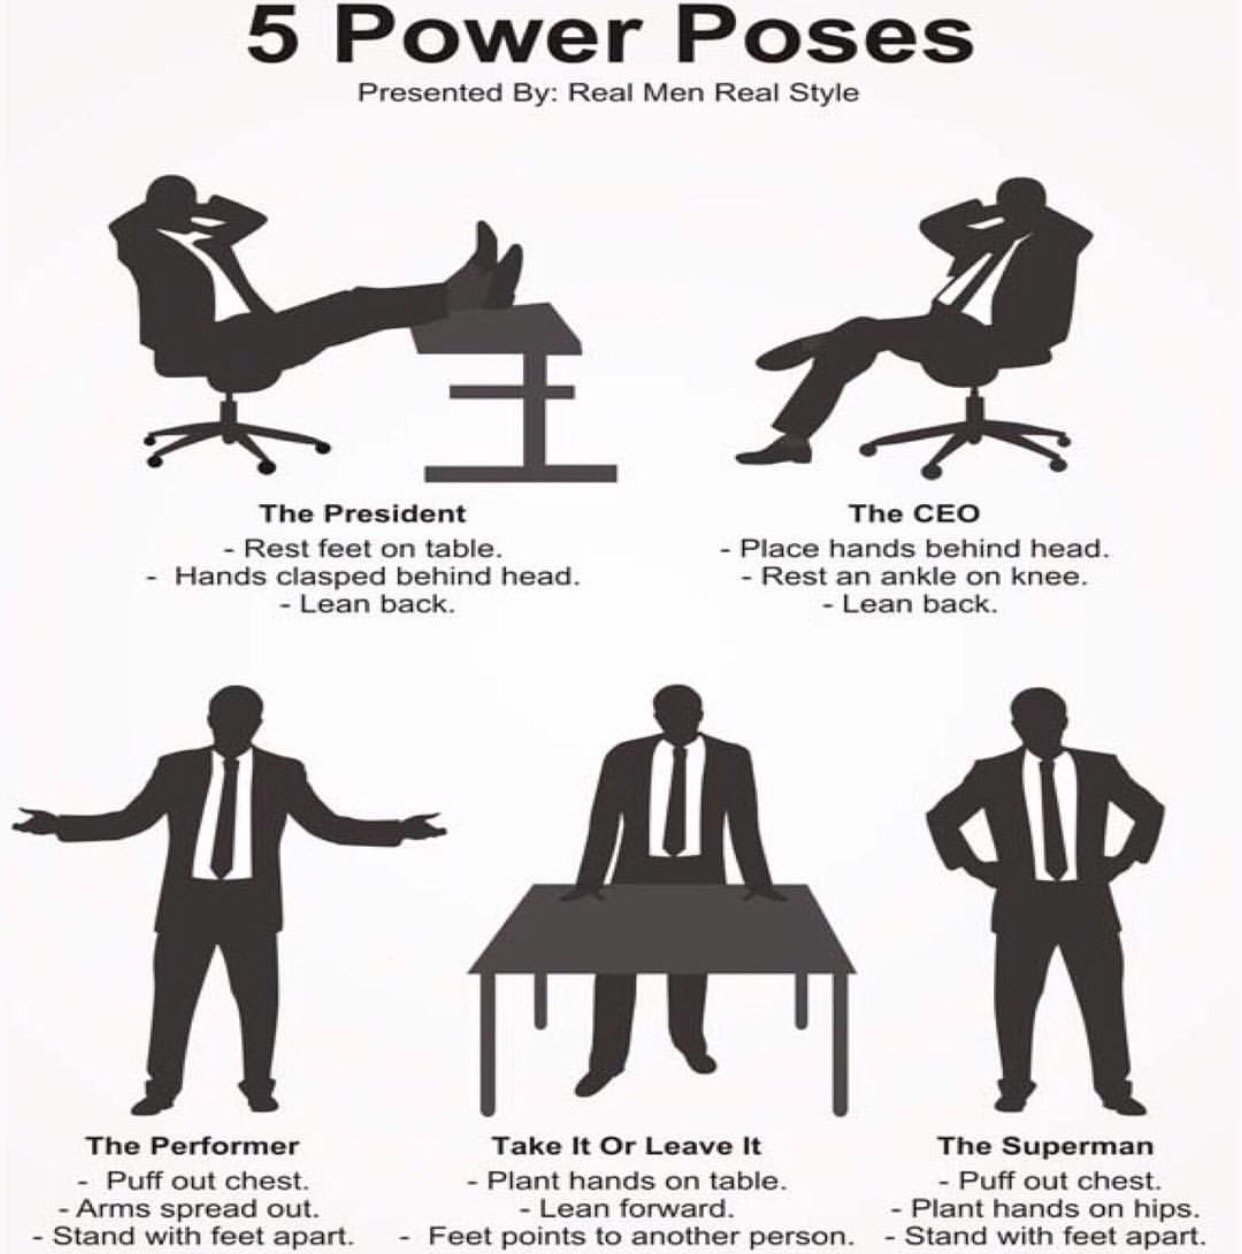 Mastering Power Poses: Boost Your Confidence with 5 Key Body Language Tips